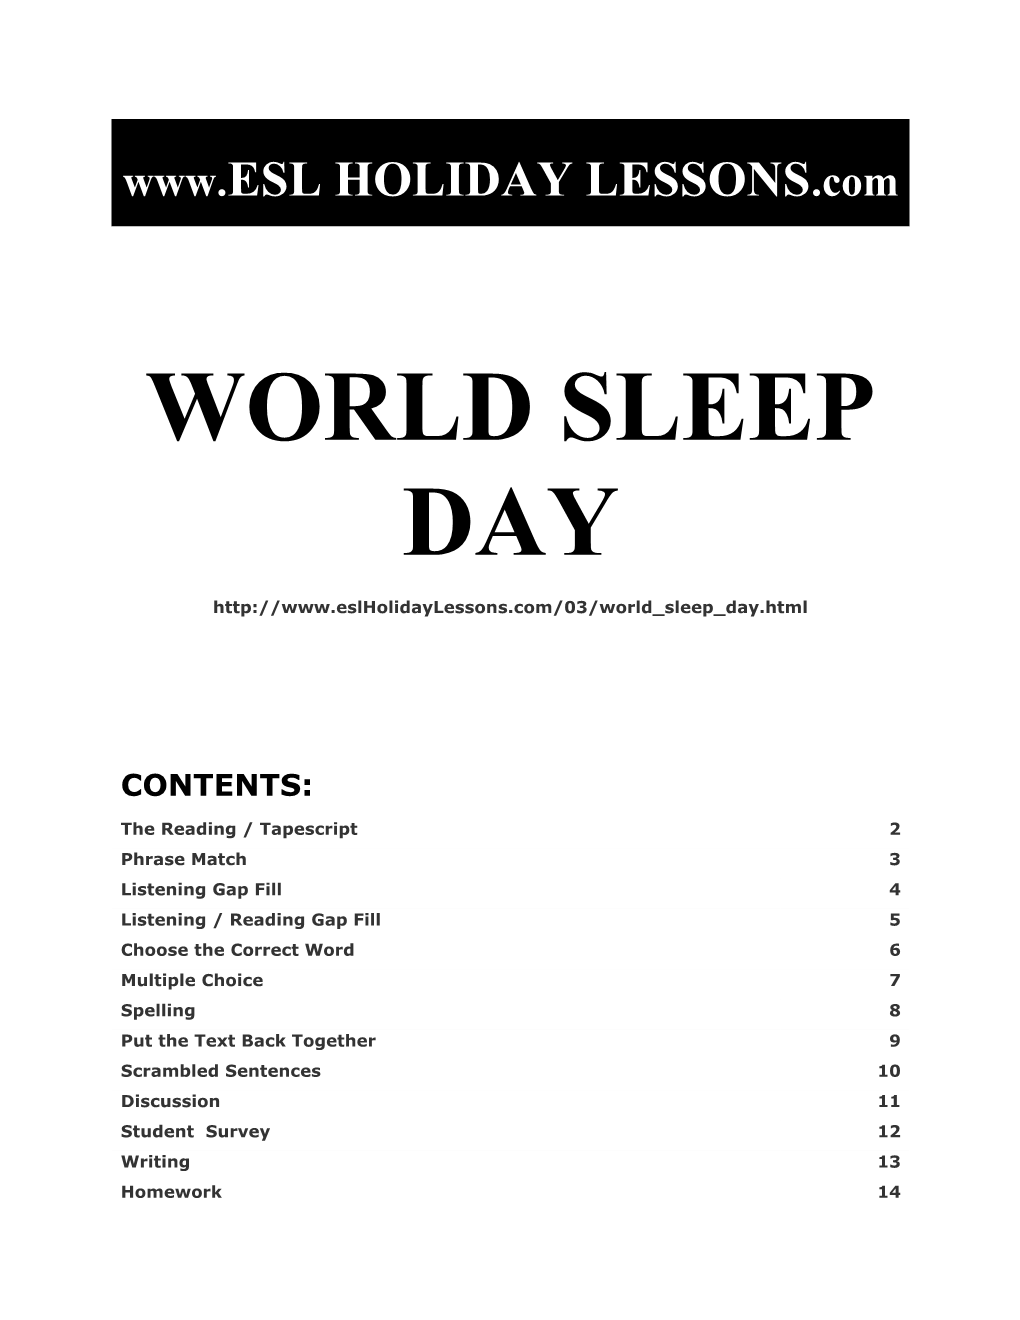 Holiday Lessons - World Sleep Day